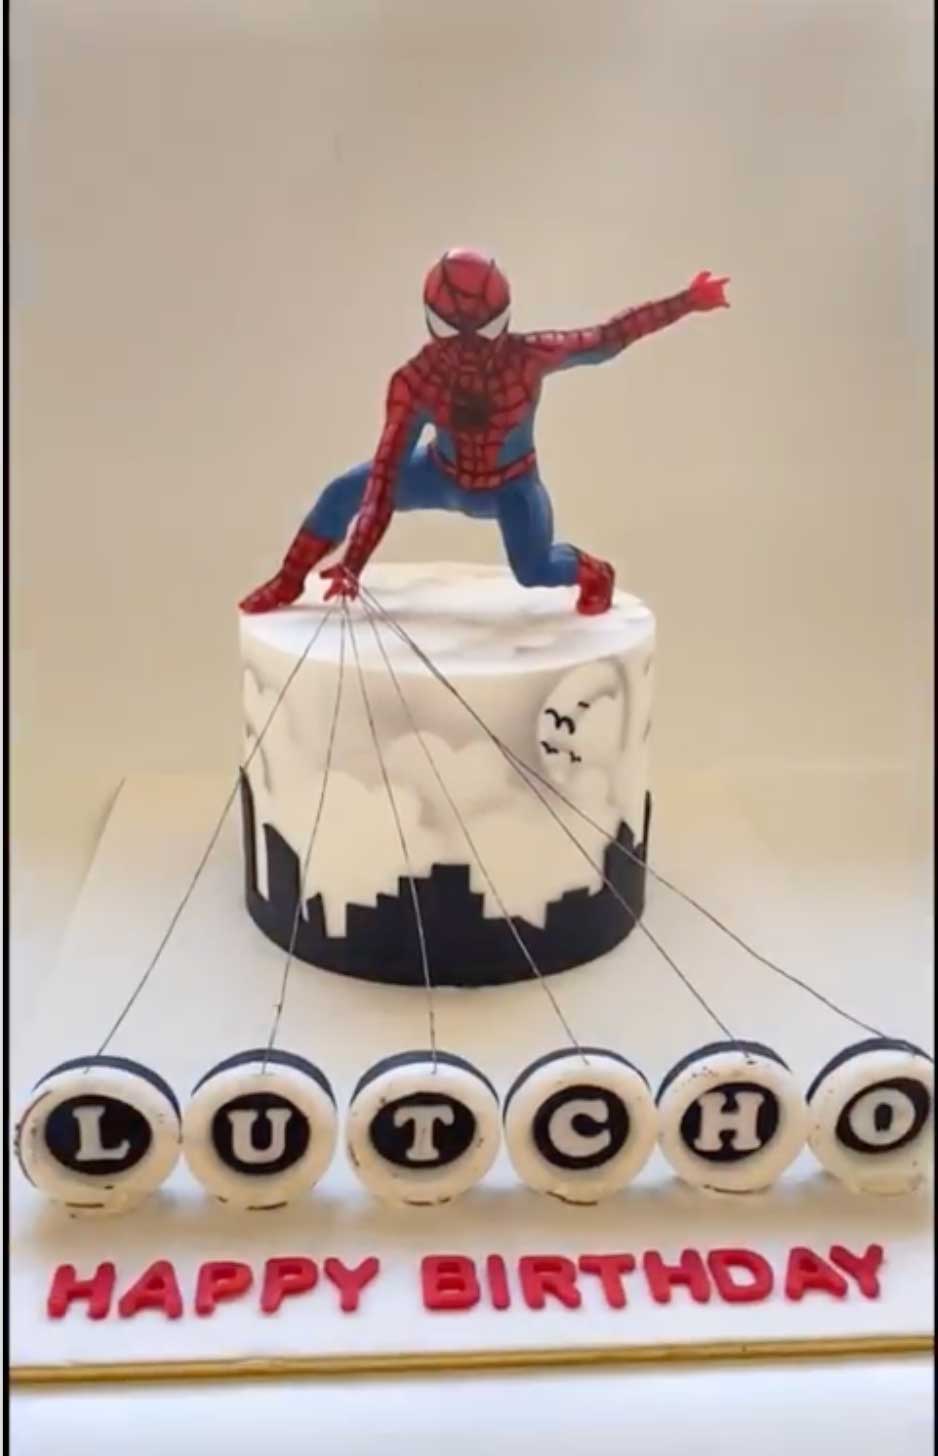 Flaming-Spider-Man-Cake where string covering and candle coverings burn away to reveal birthday name.